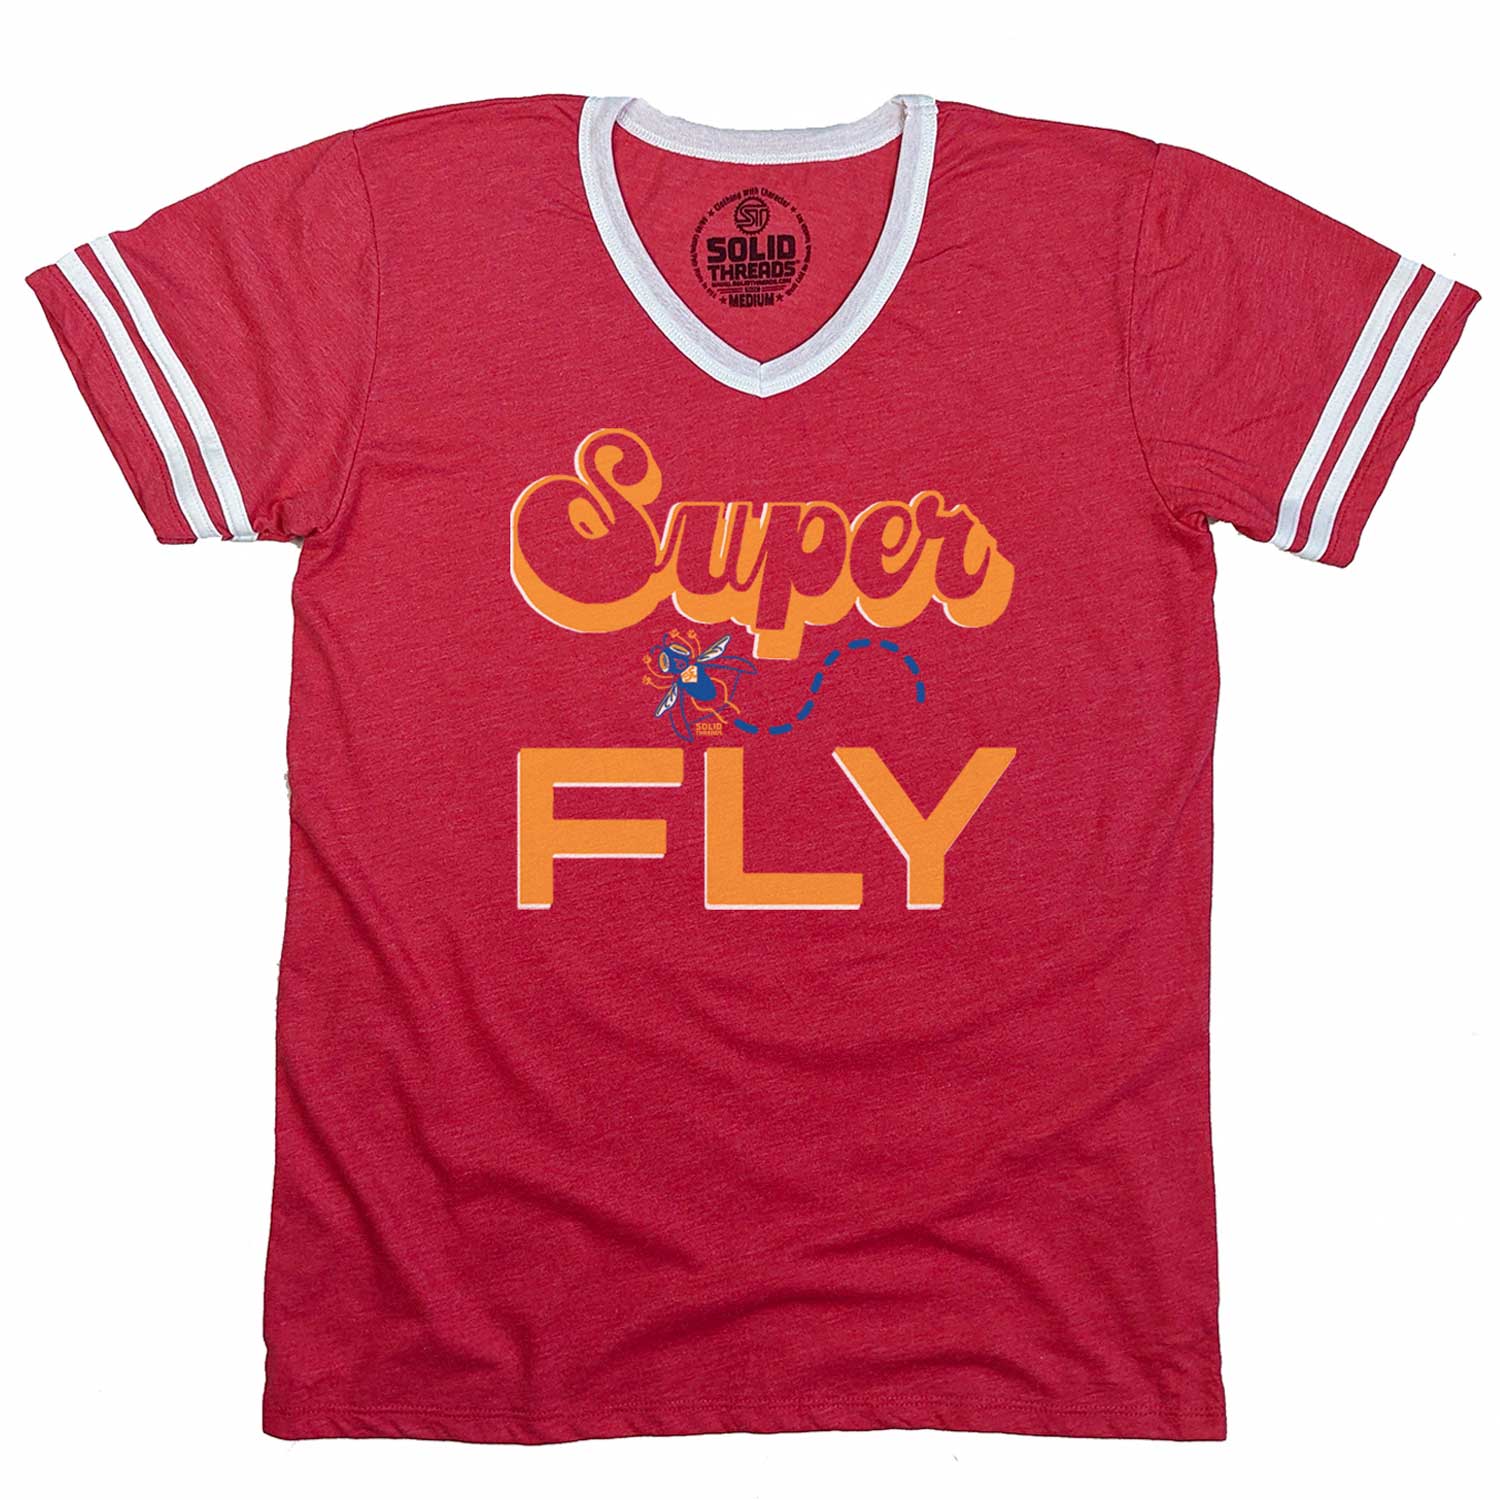 Men's Superfly Vintage Graphic V-Neck Tee | Retro Curtis Mayfield T-shirt | Solid Threads